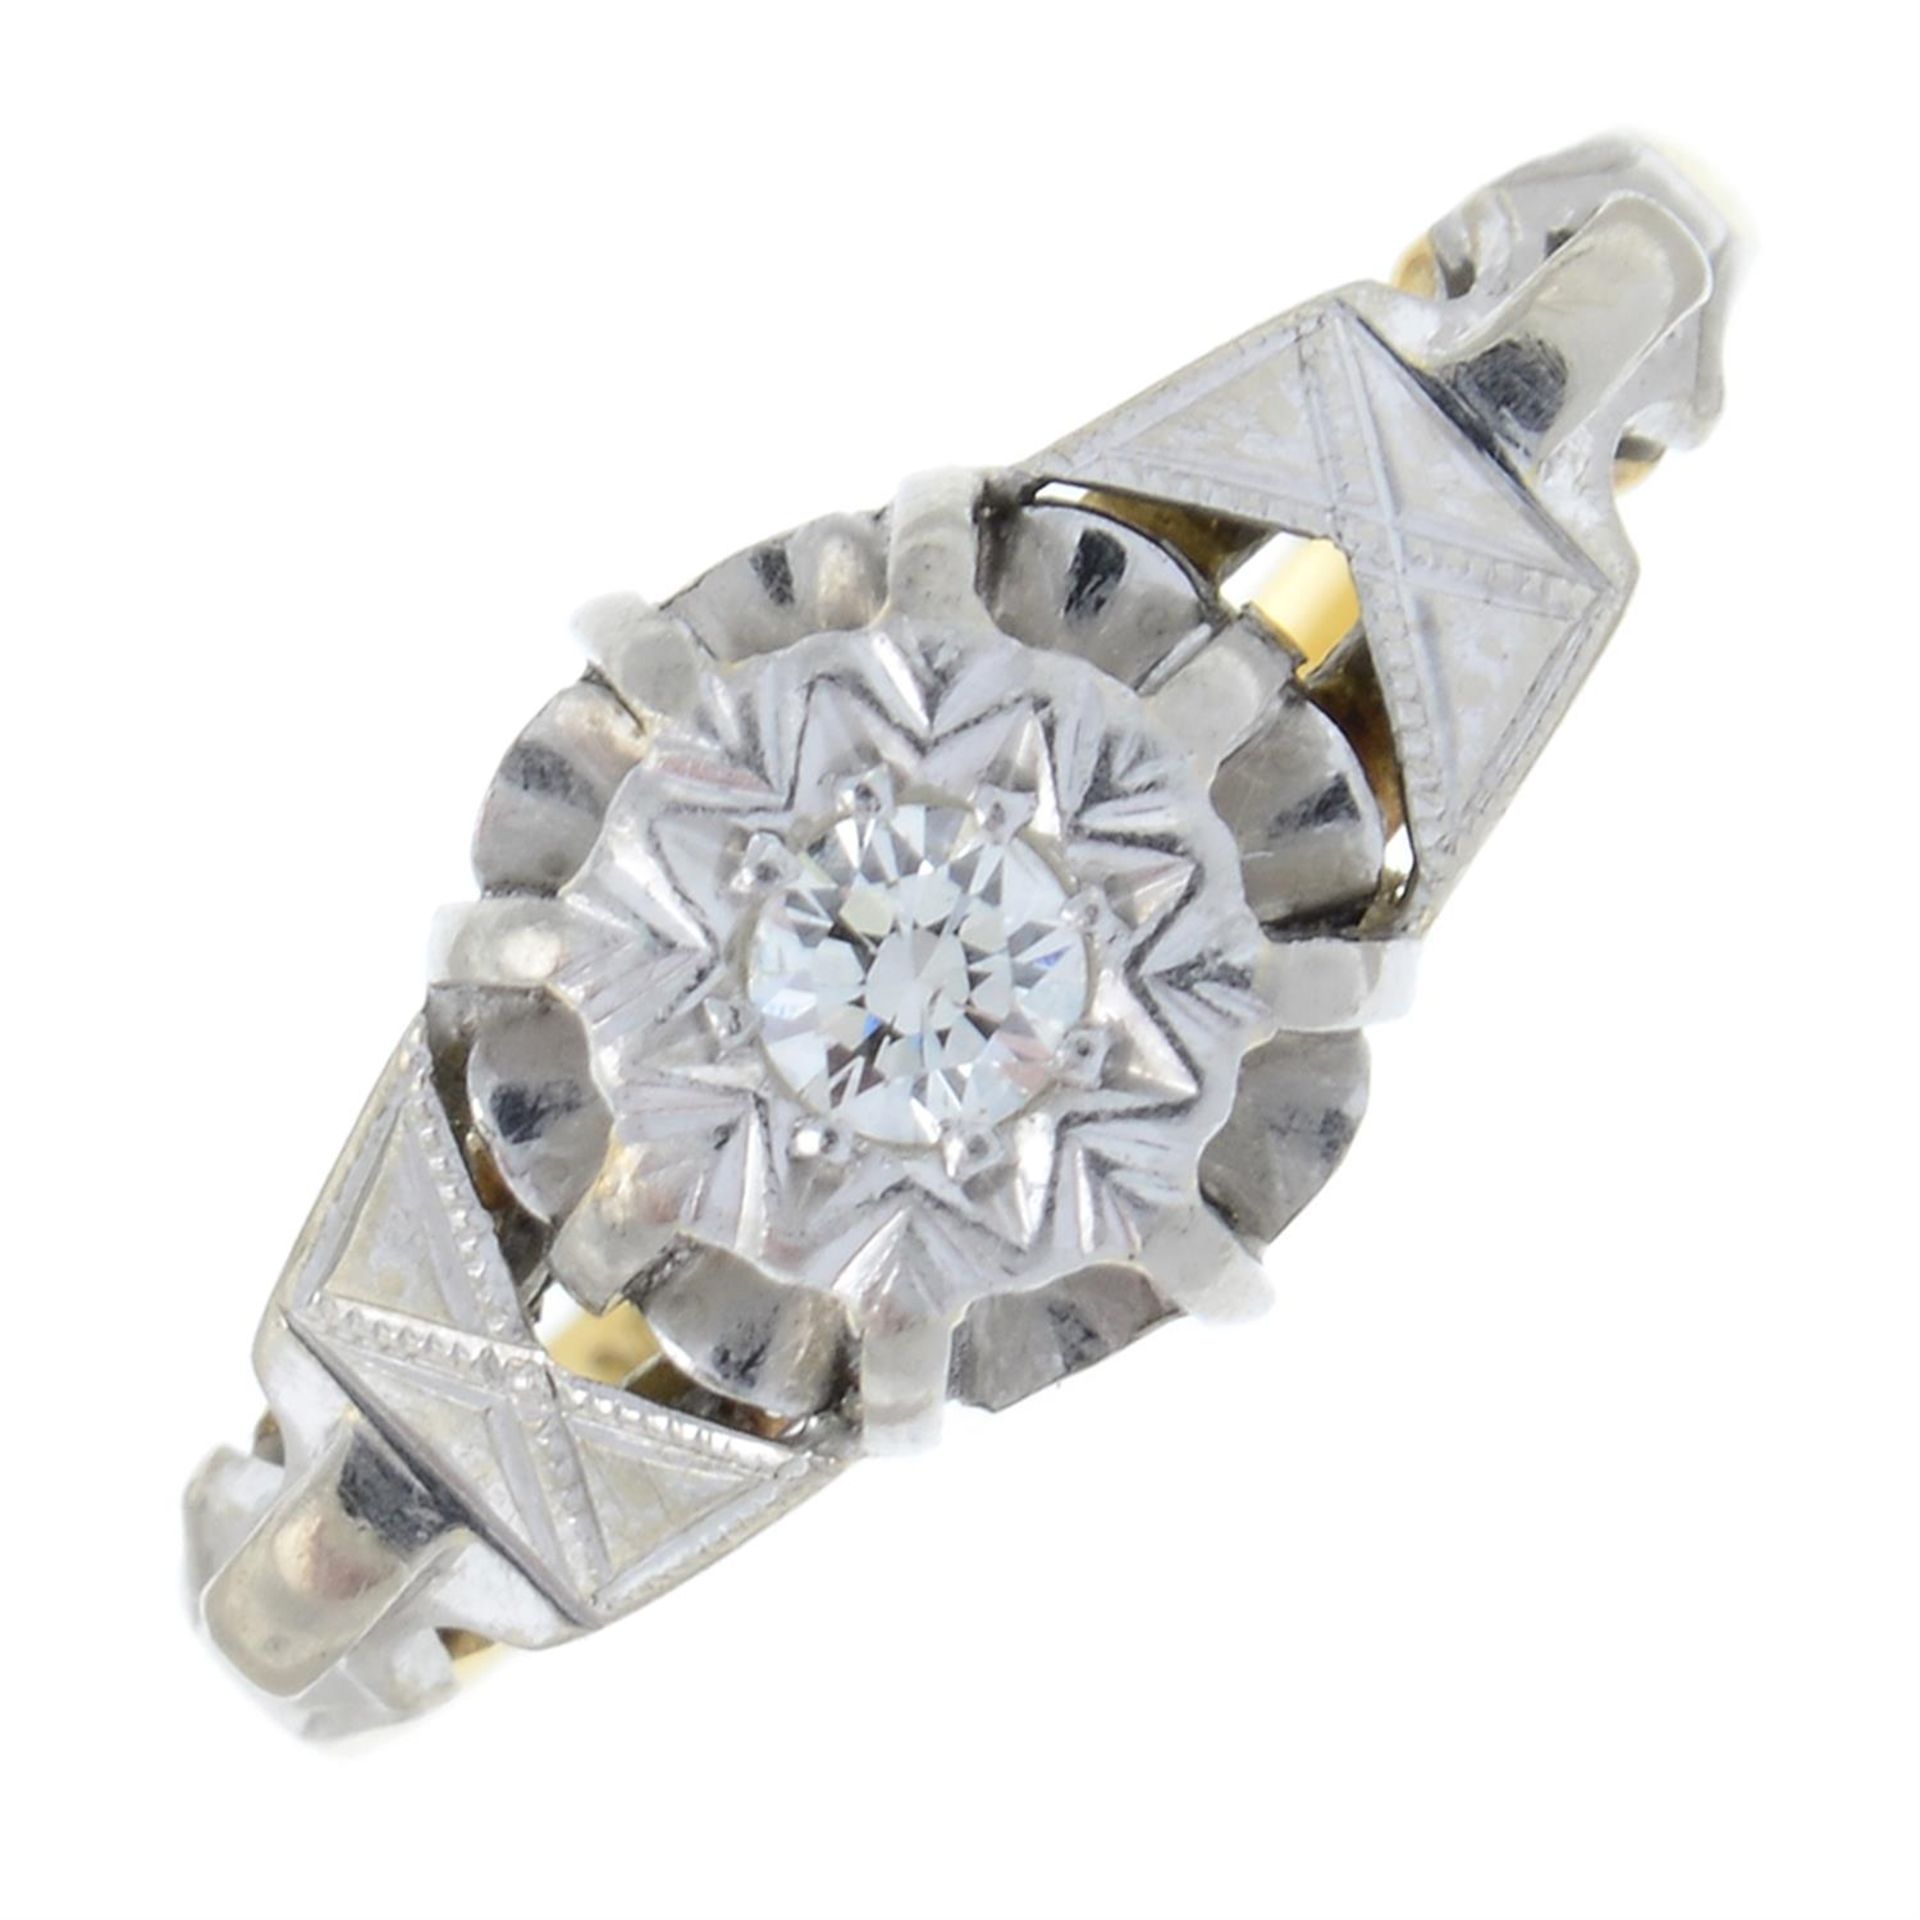 An early to mid 20th century 18ct gold and platinum brilliant-cut diamond single stone ring.